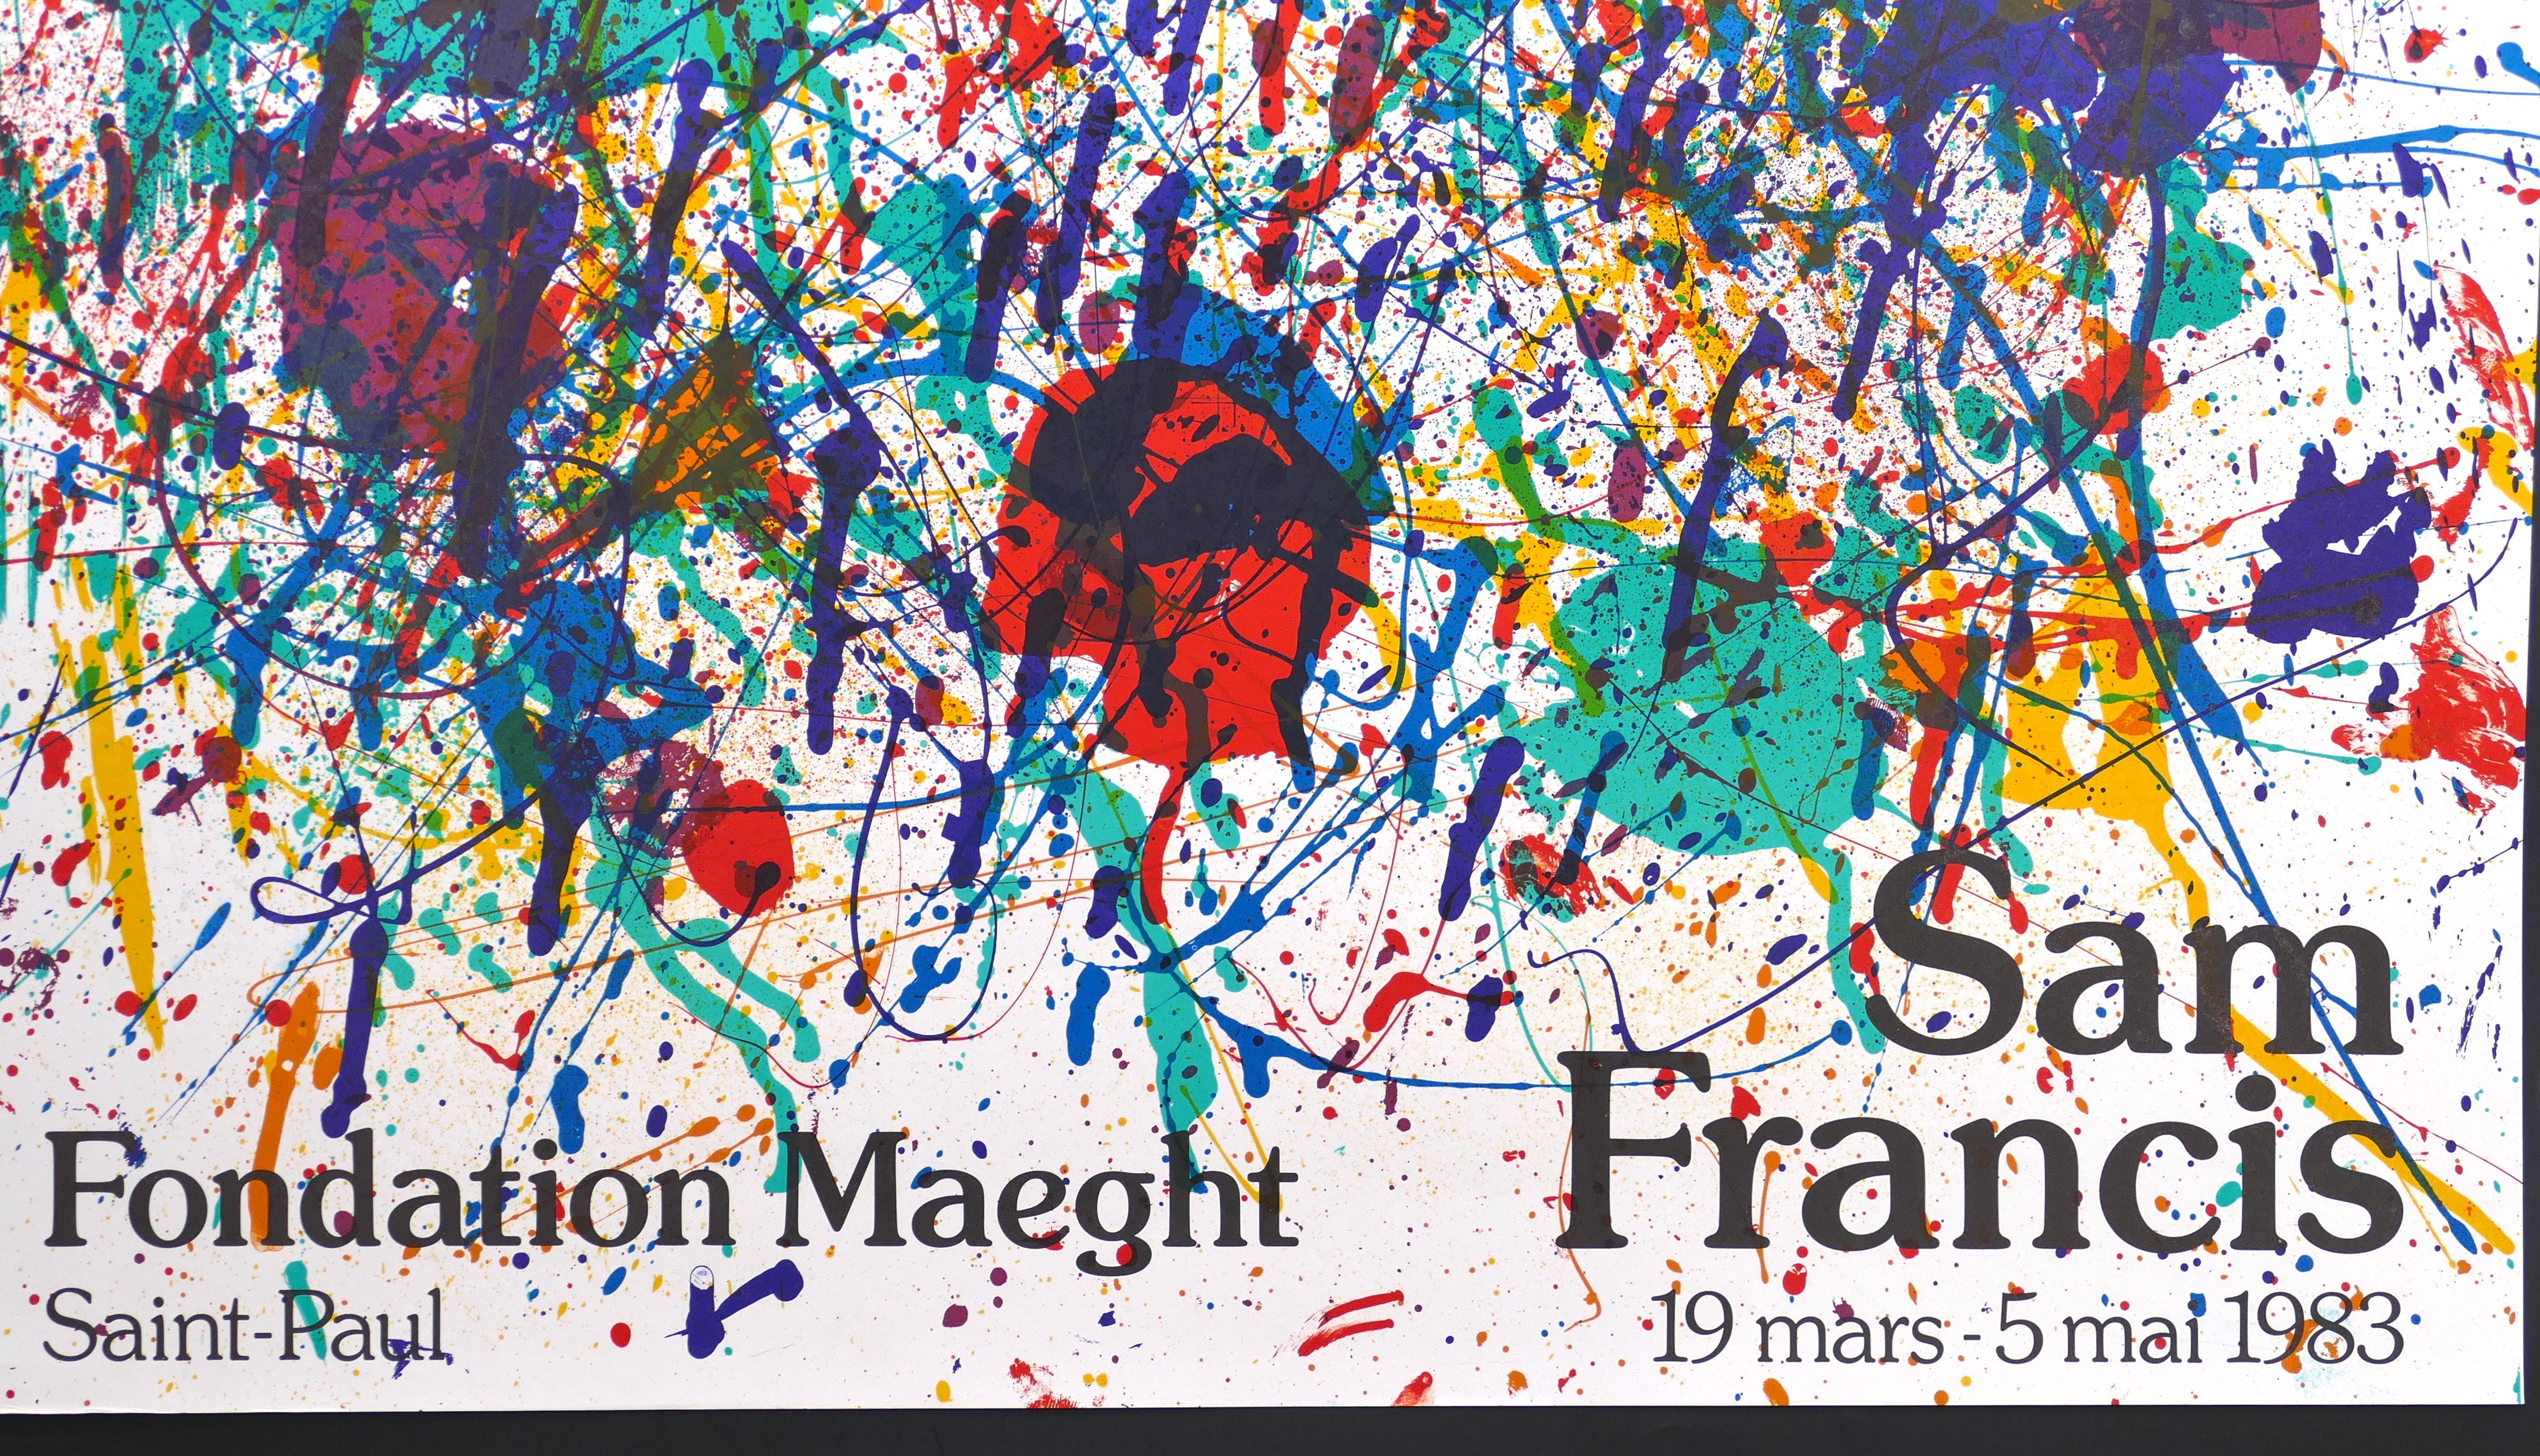 Vintage Poster Vintage Poster Fondation Maeght 19 Mars 1983  - Abstract Expressionist Print by Sam Francis